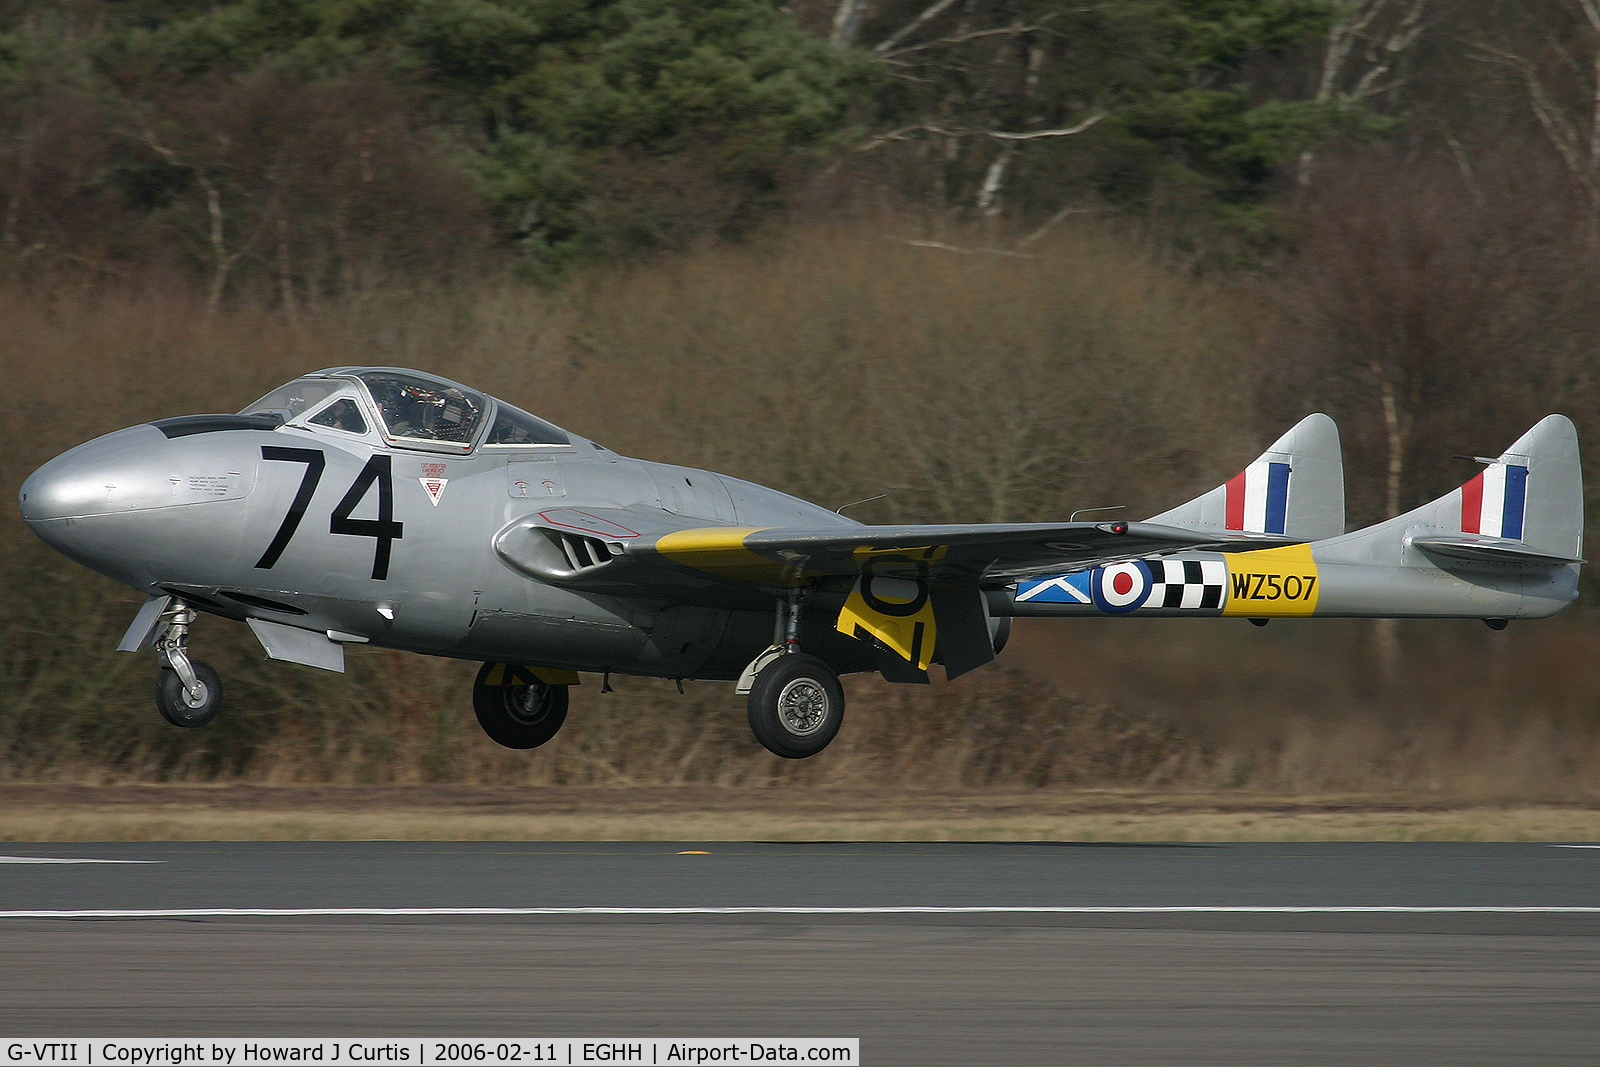 G-VTII, 1954 De Havilland DH-115 Vampire T.11 C/N 15127, Painted as WZ507; just about to land on runway 26.